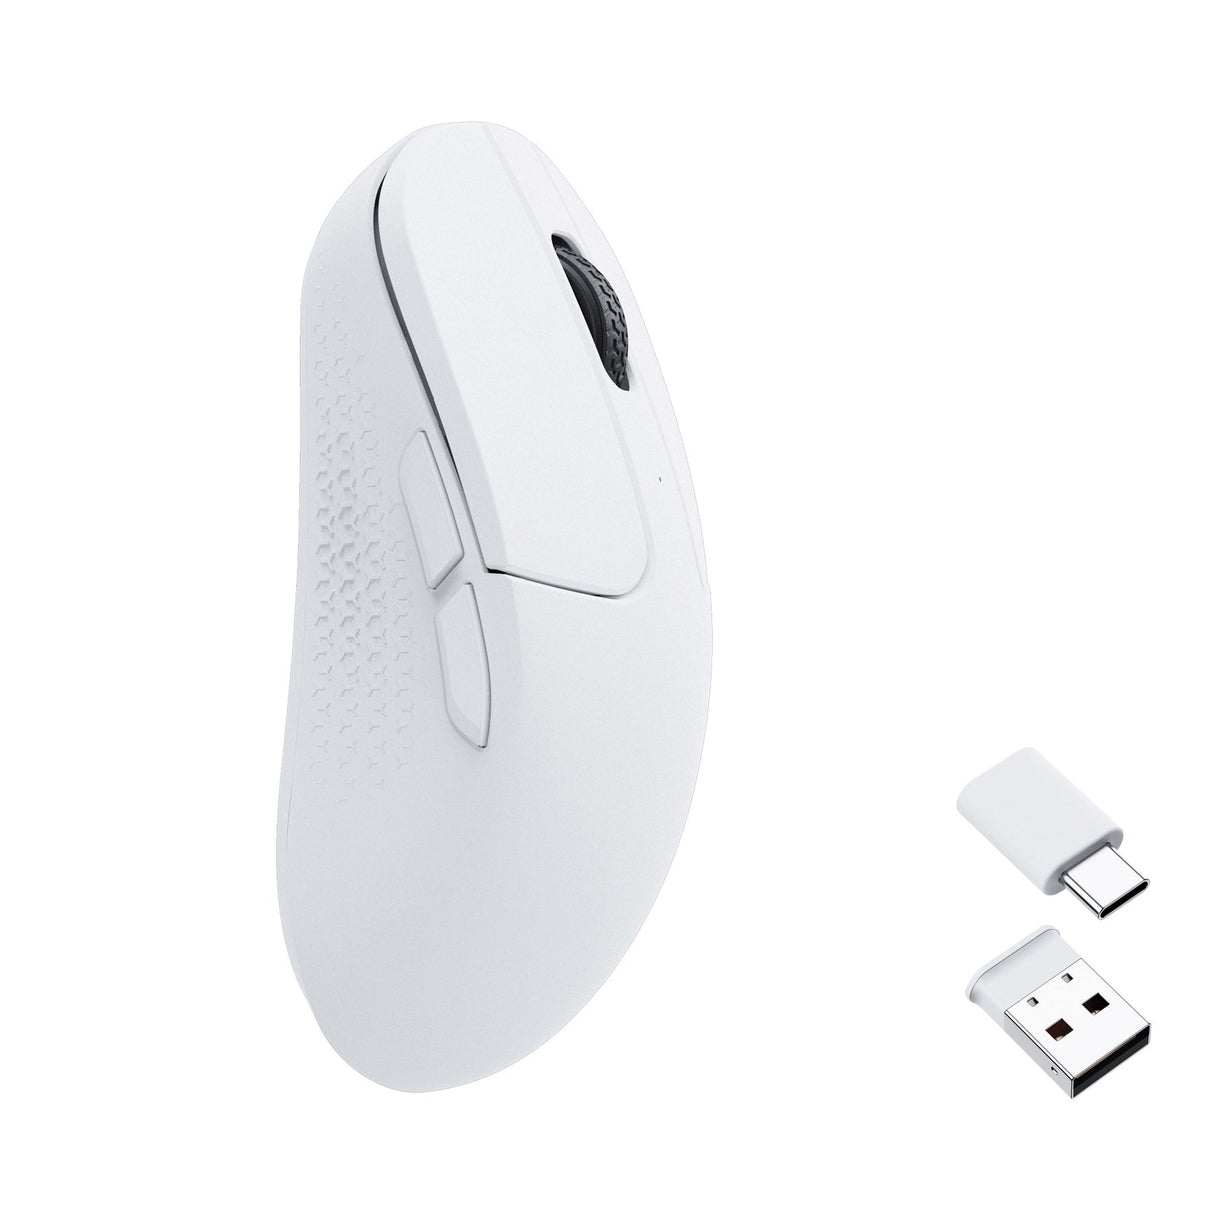 Keychron M3 Mini Wireless Mouse – Keychron  Mechanical Keyboards for Mac,  Windows and Android